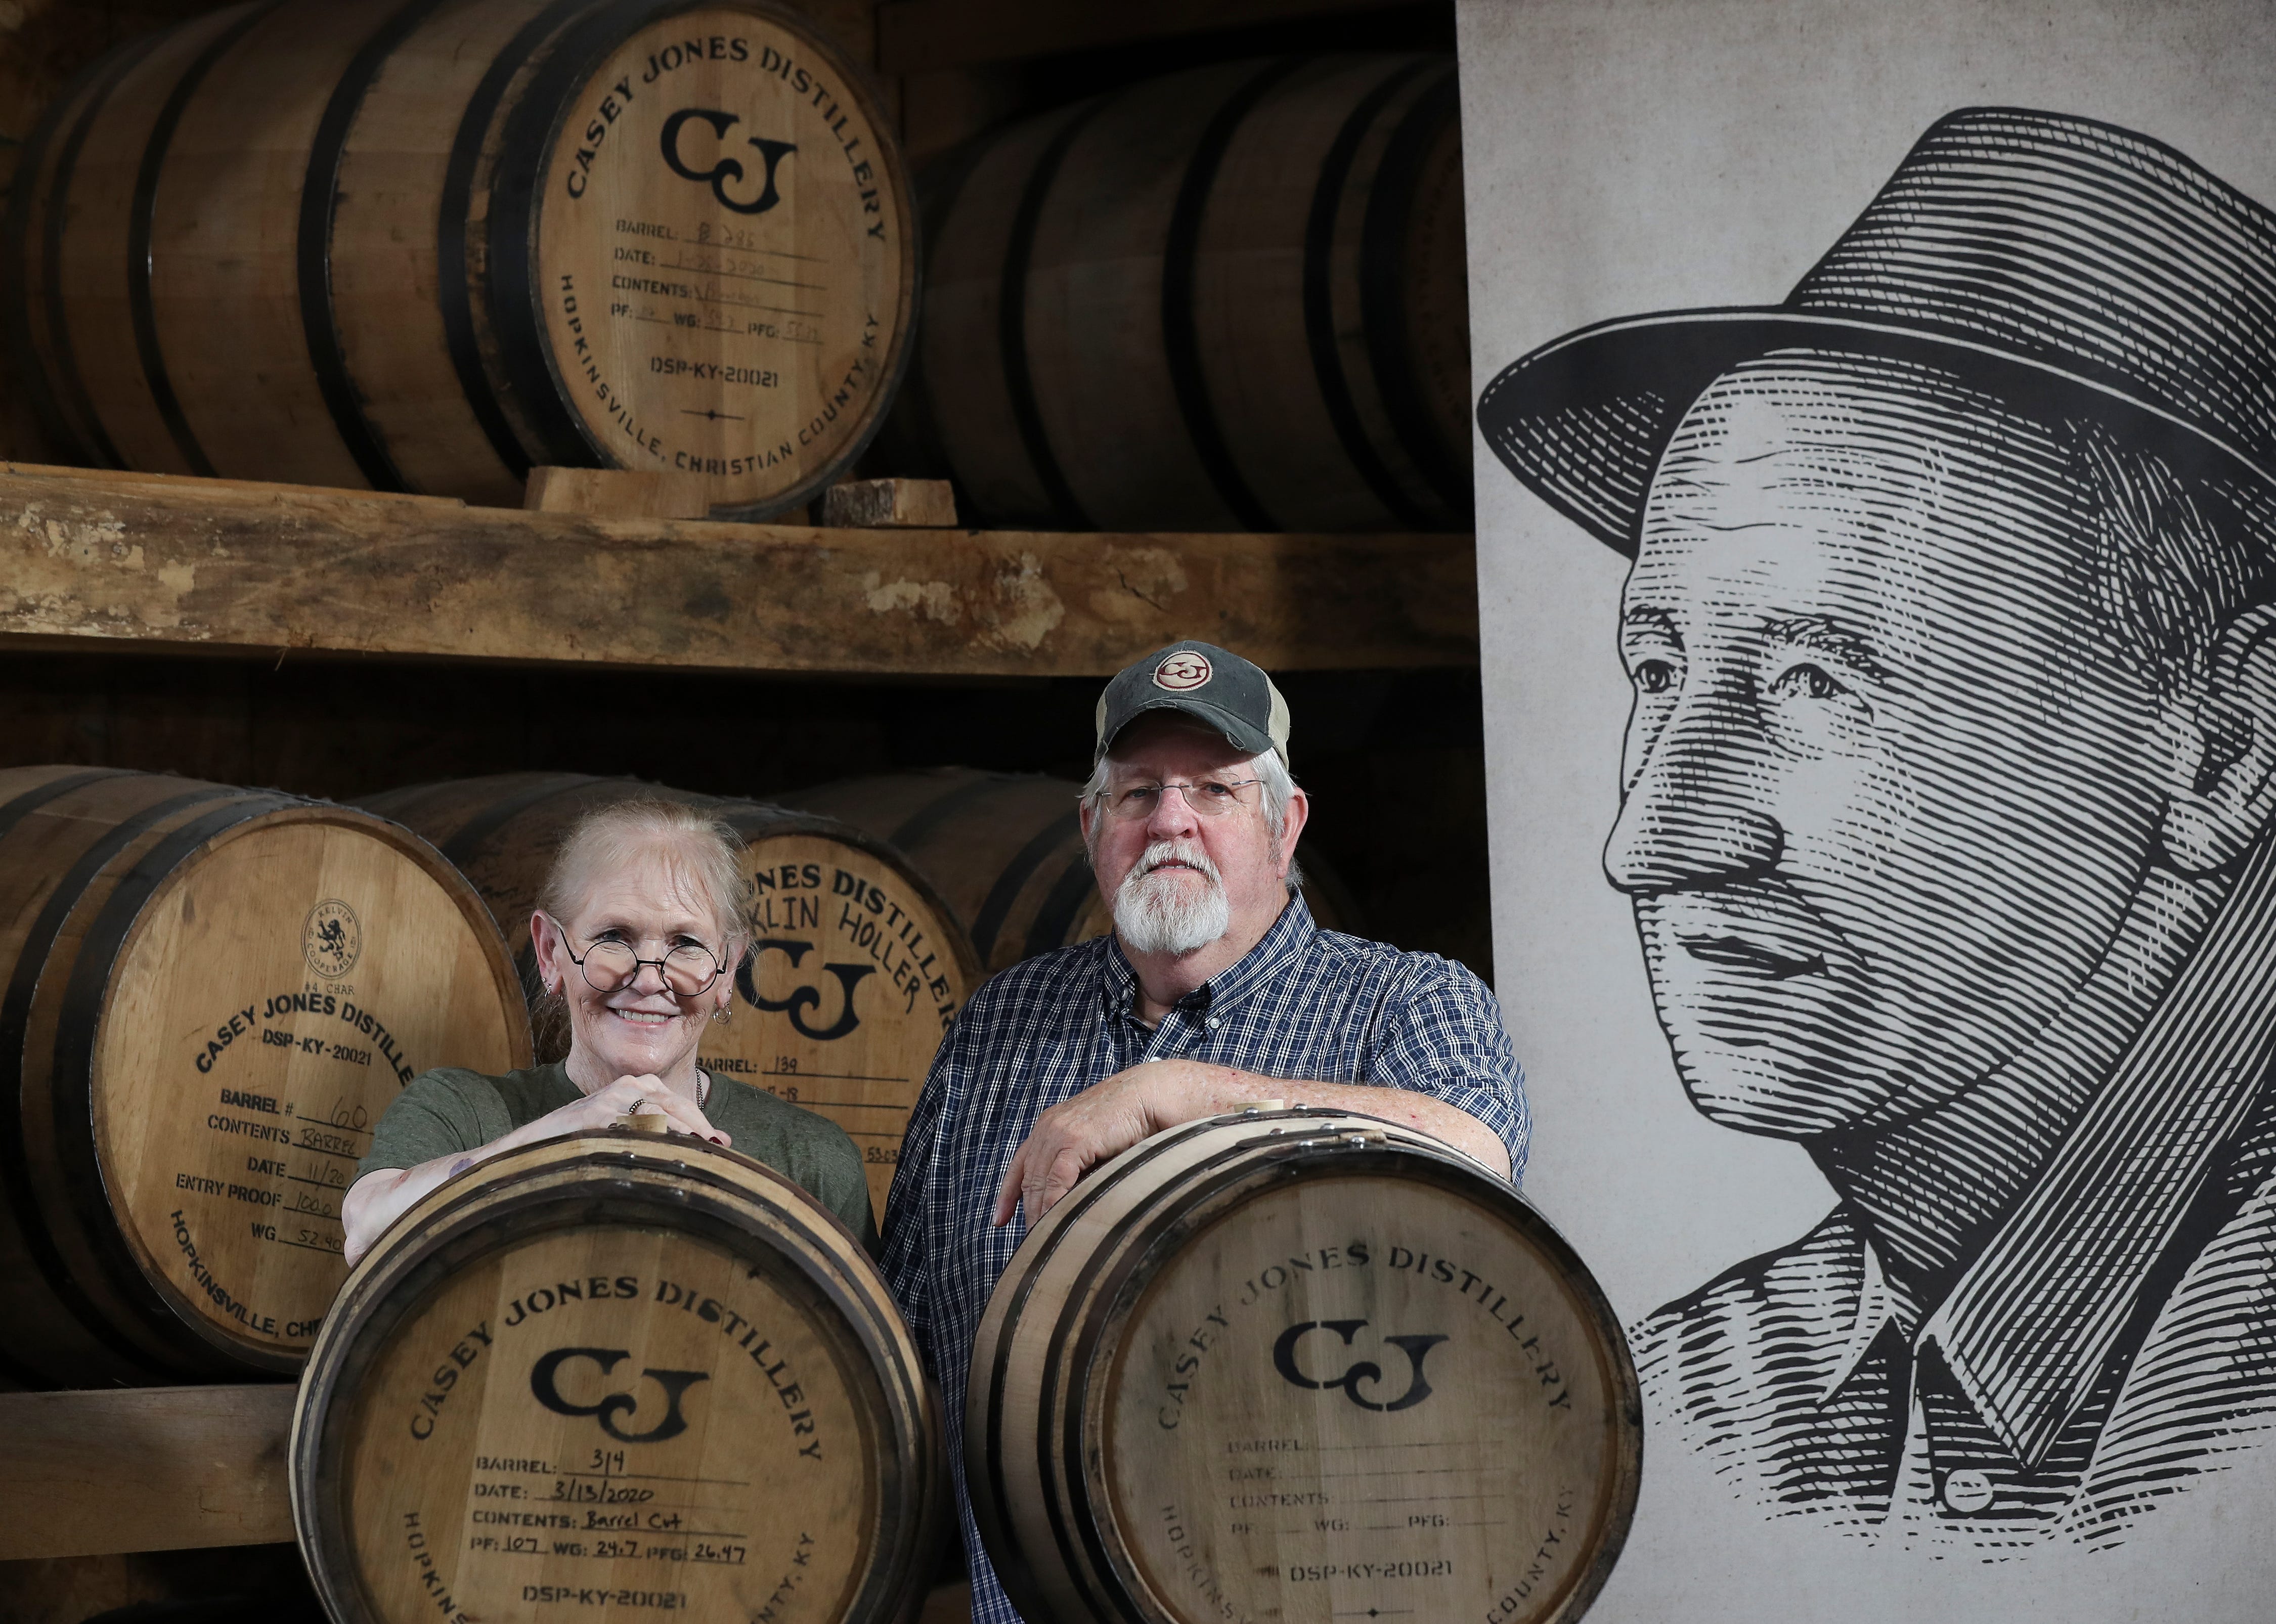 Arlon Casey Jones, right, and his wife Peg Hays at the Casey Jones Distillery in Hopkinsville, Ky. Jones' grandfather, Casey Jones, was a moonshine distiller who also built copper stills for other moonshine distillers during the prohibition era for which he spent some time in jail.